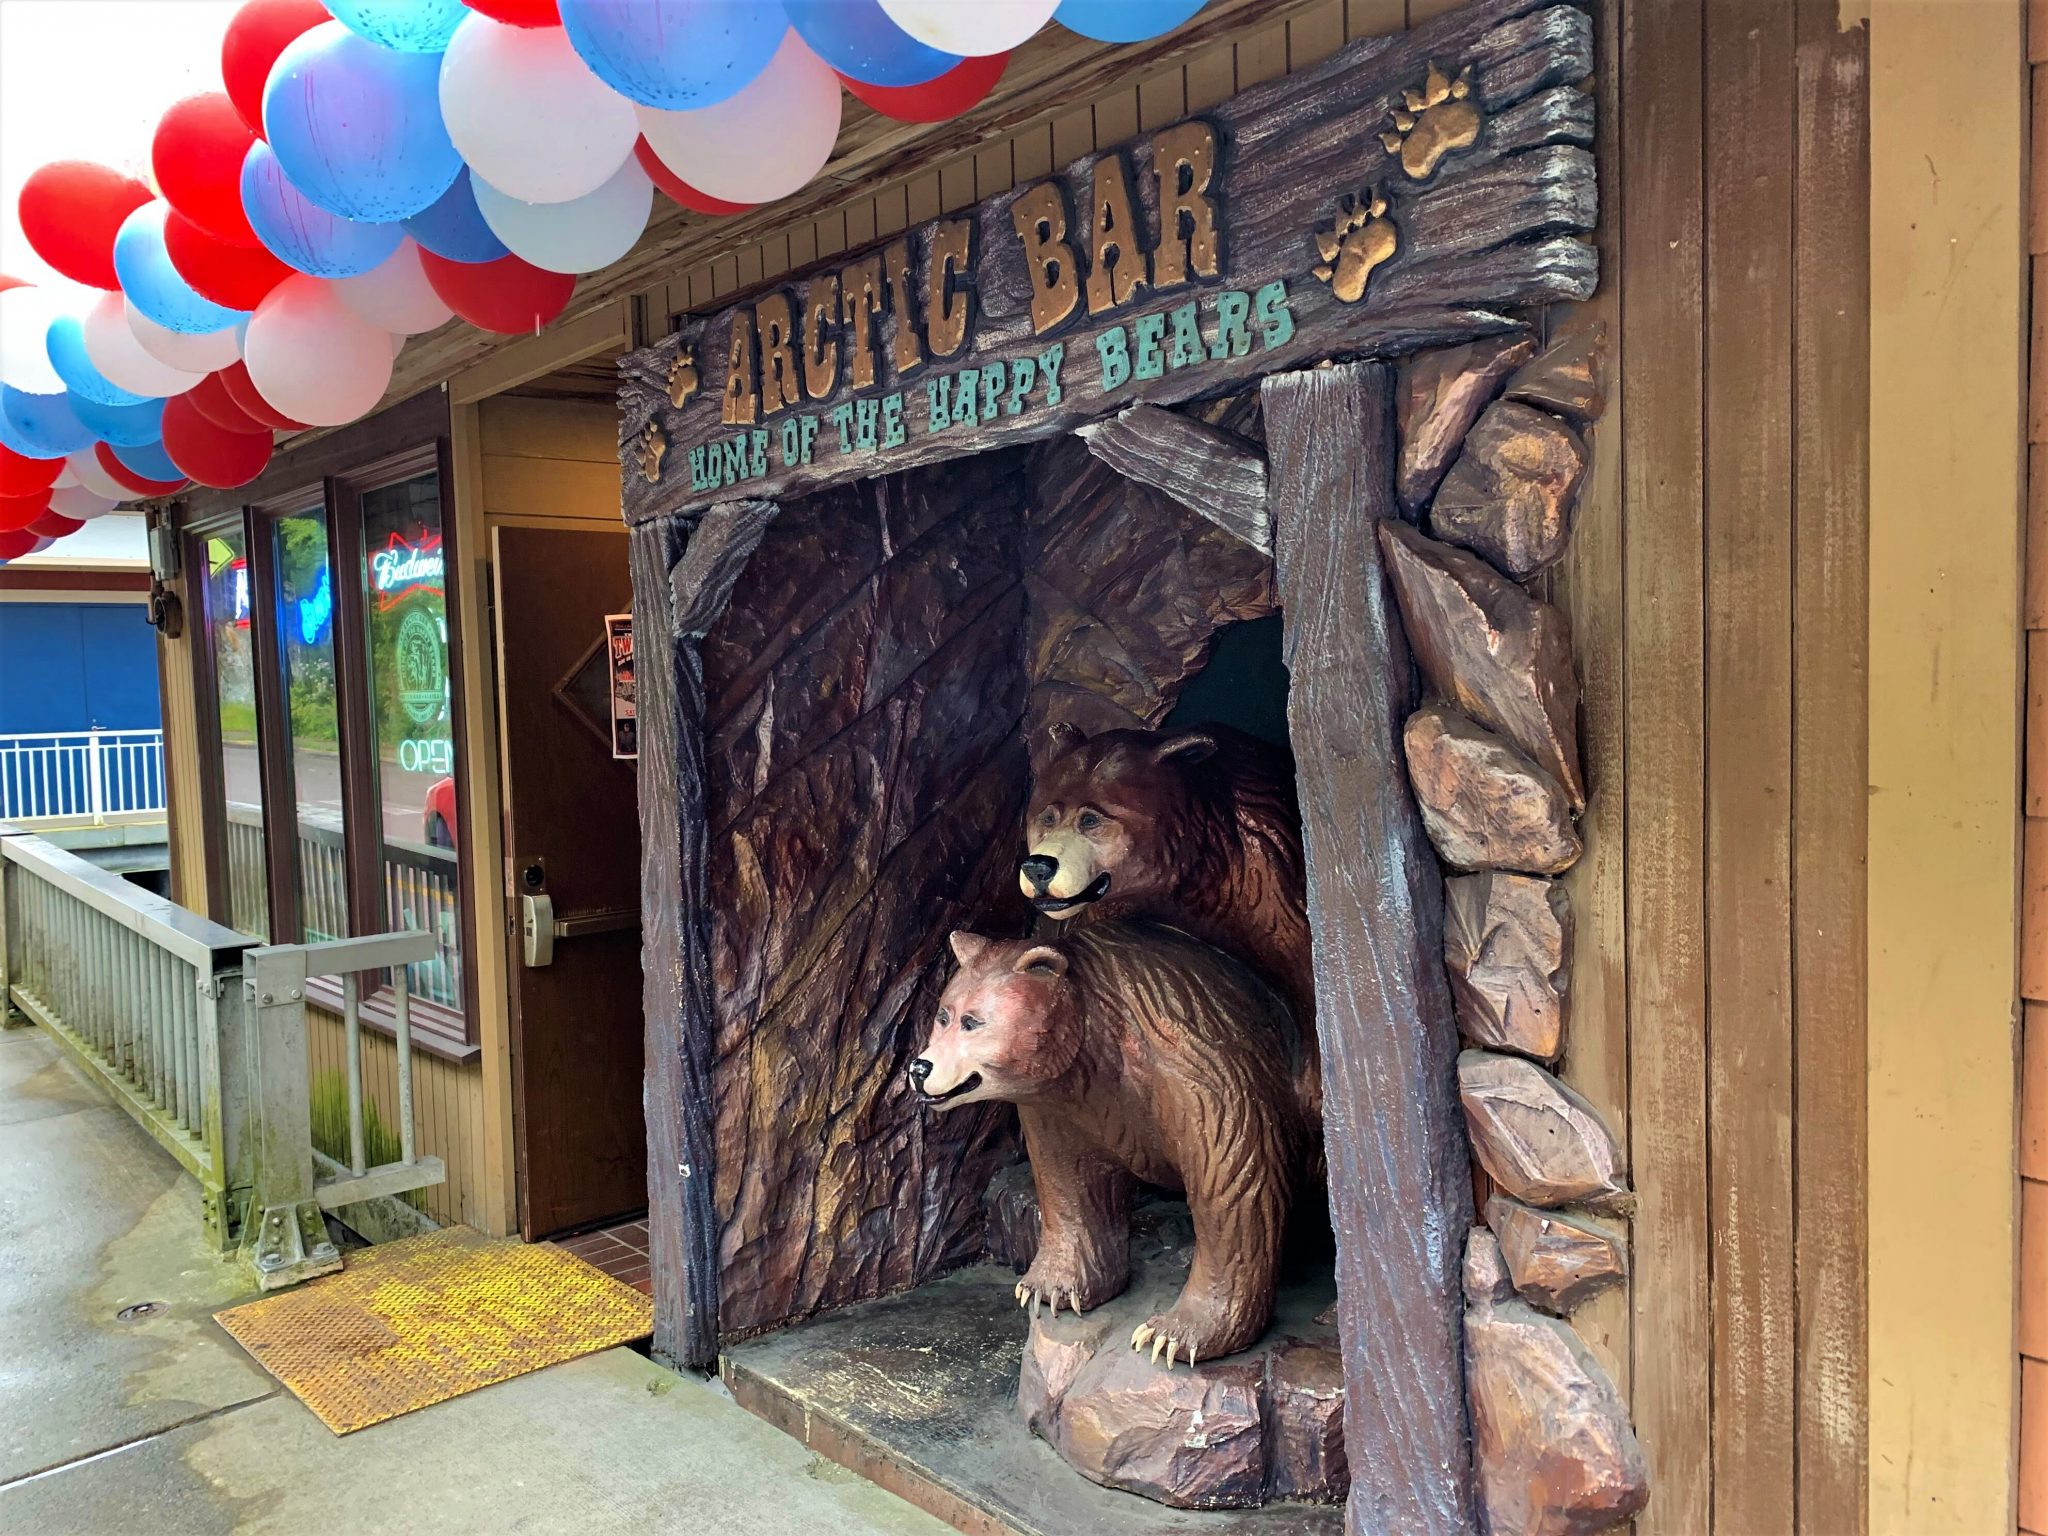 Two bear statues and balloons greet patrons at the Arctic Bar’s entrance in Ketchikan.